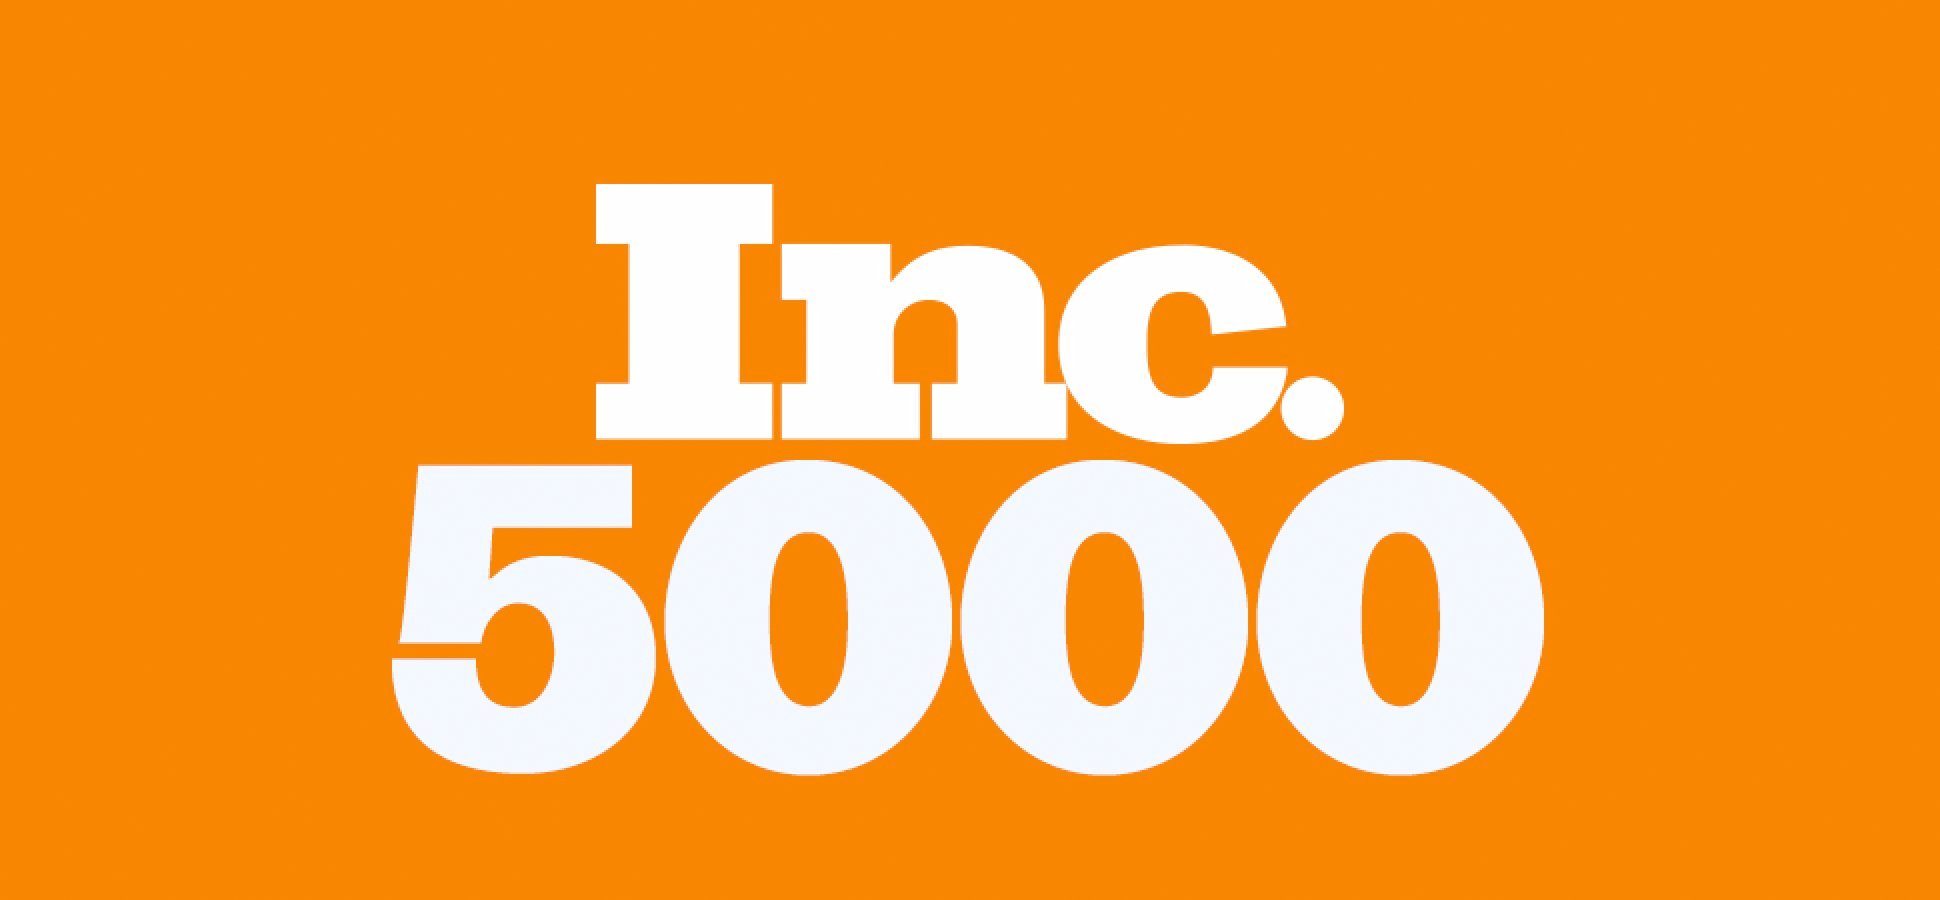 MarketReach named to the Inc. 5000 list of fastest growing private companies in the U.S.